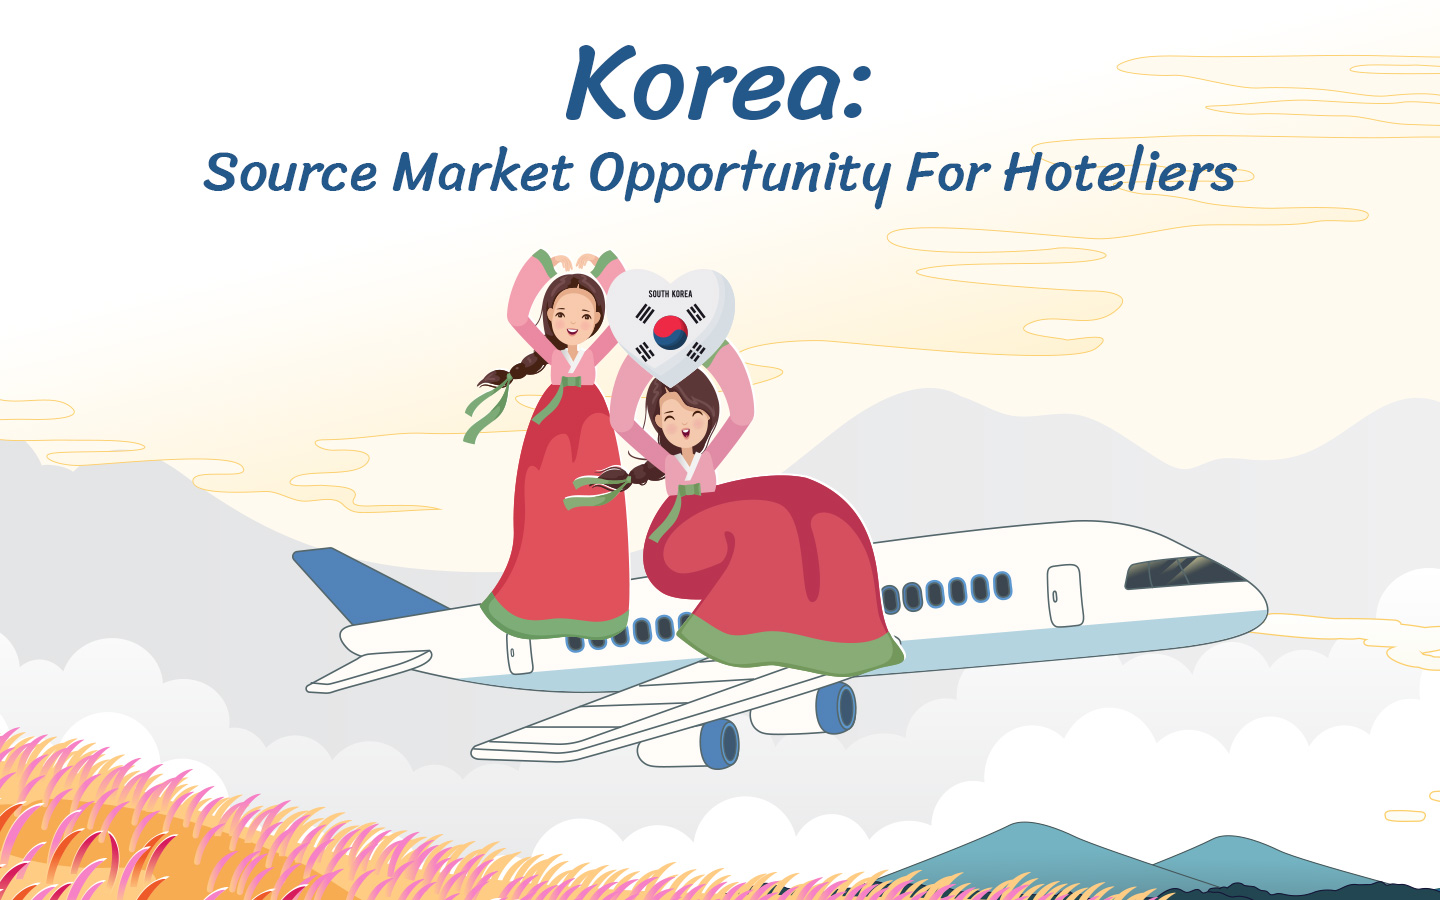 Korea: Source Market Opportunity For Hoteliers